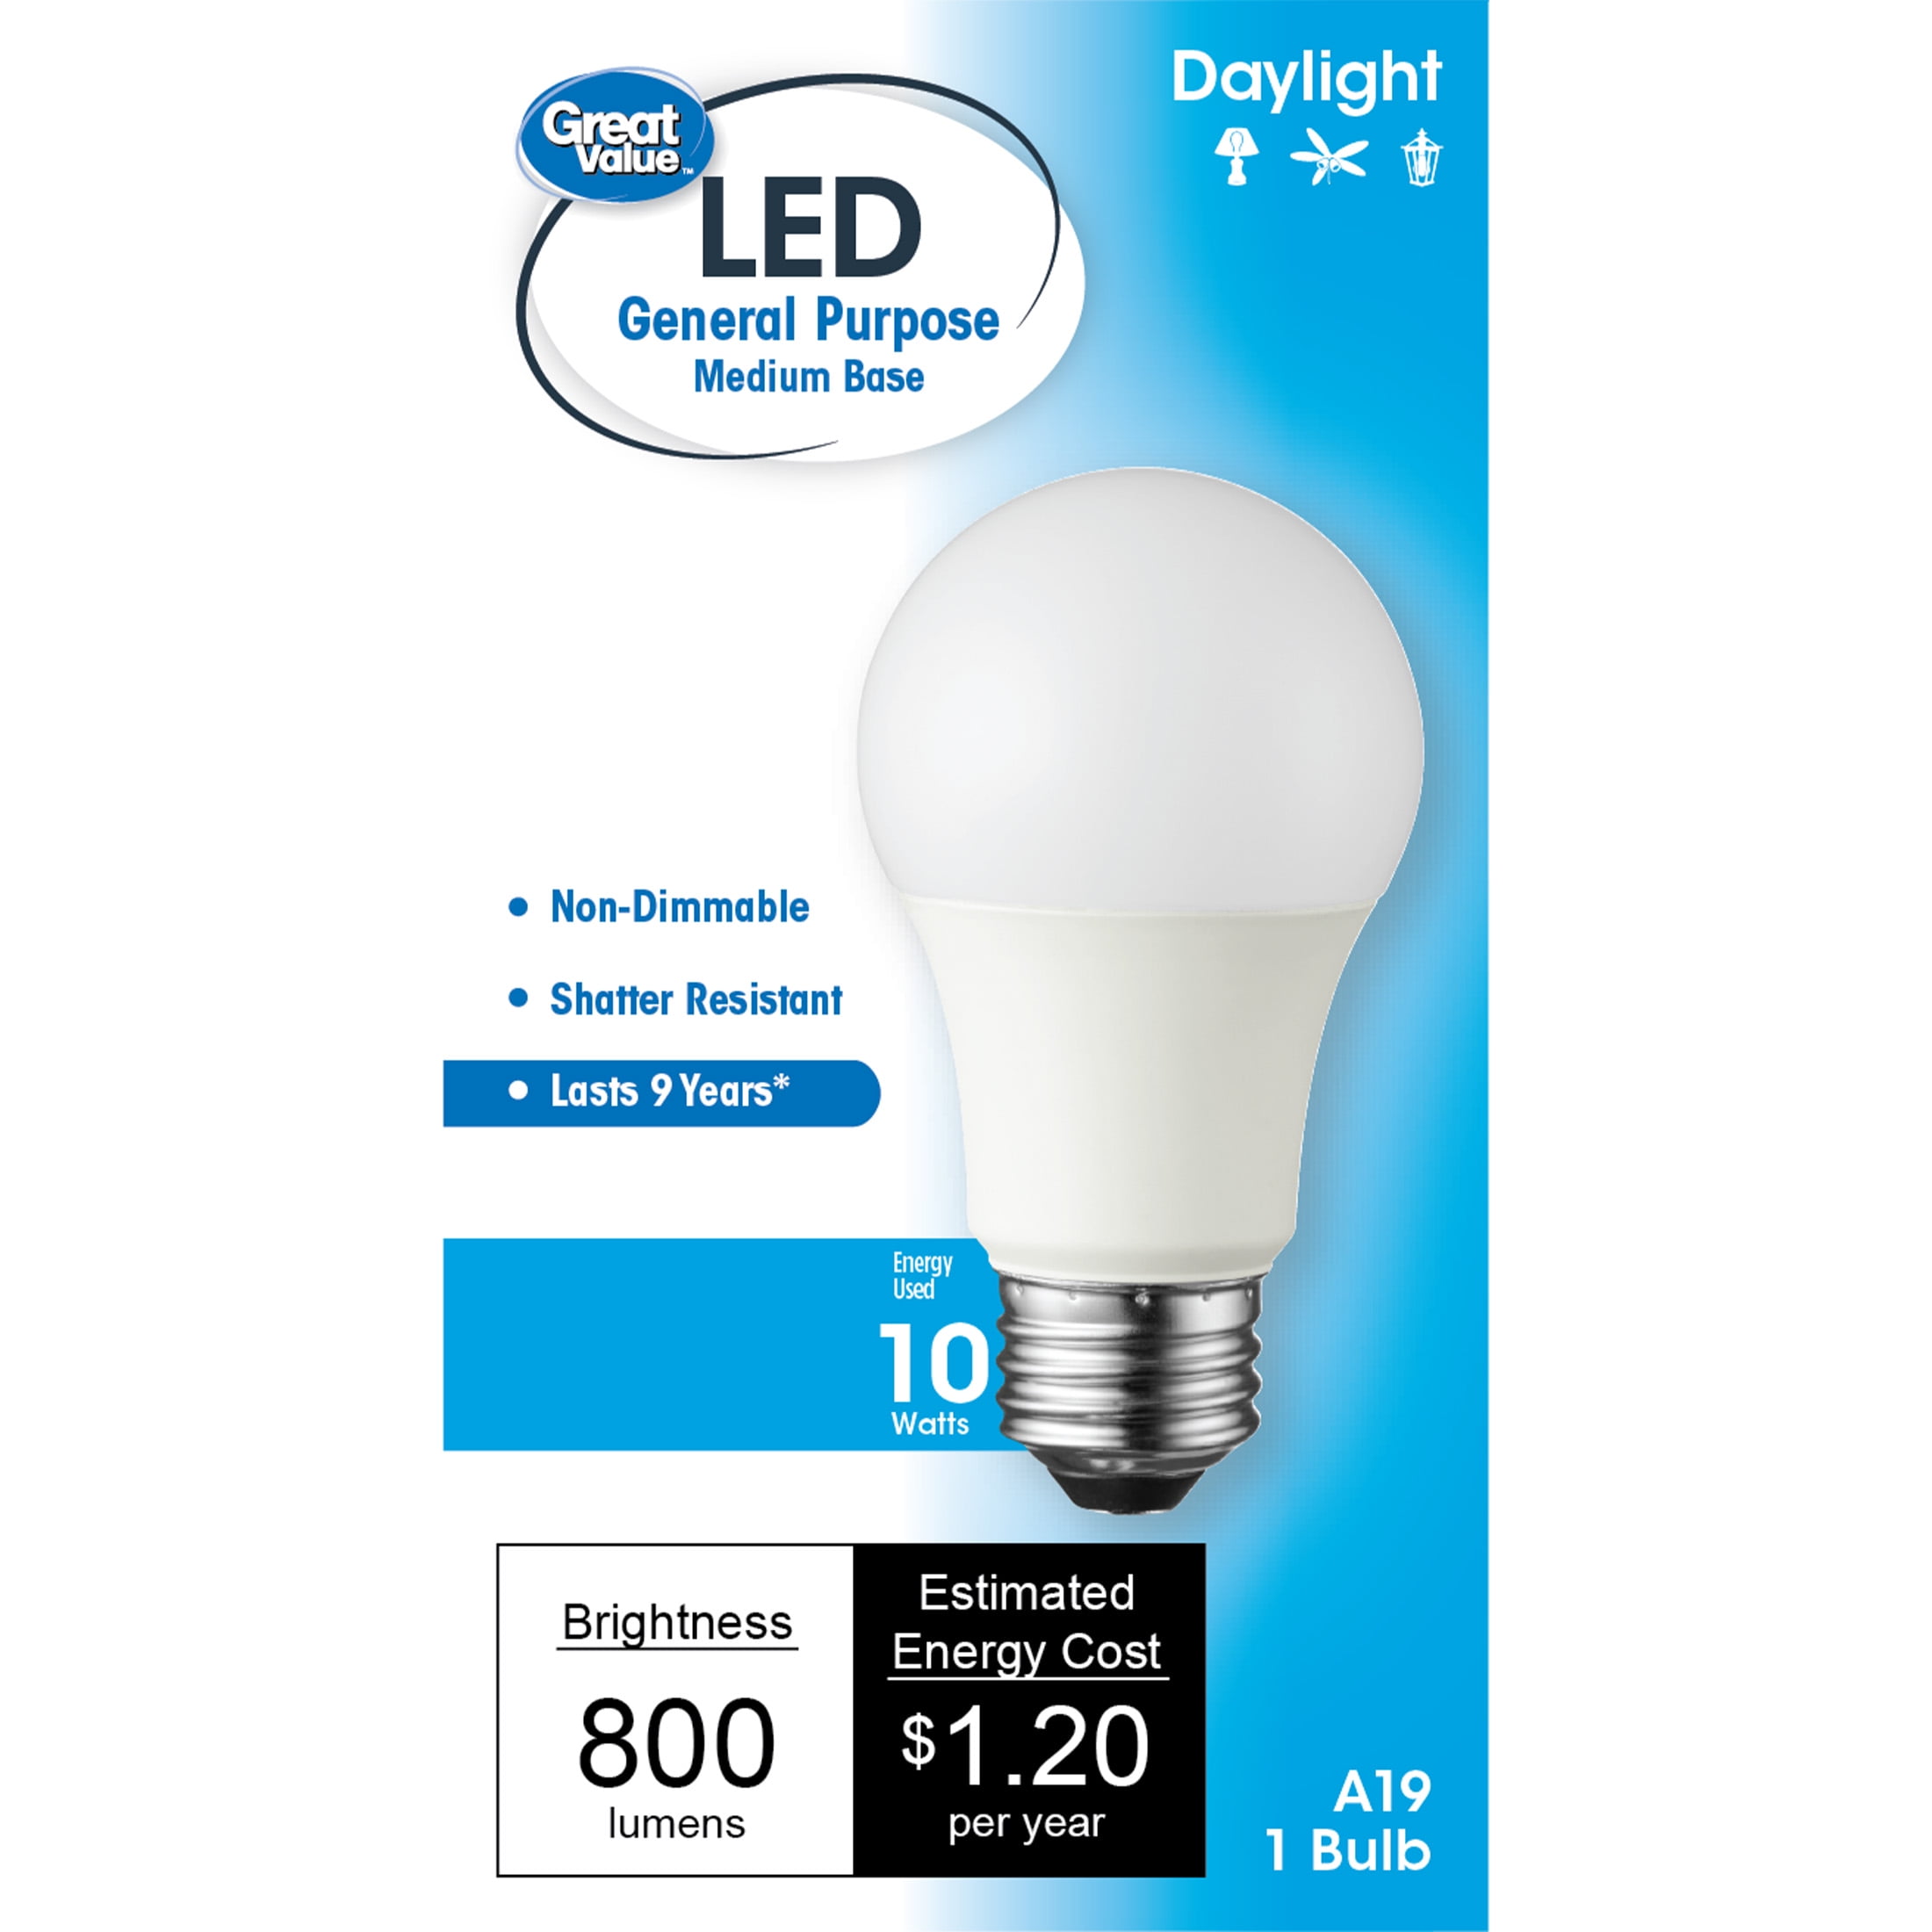 Great Value LED Light Bulb, 10W (60W Equivalent) A19 General Purpose Lamp E26 Medium Base, Non-dimmable, 1-Pack Walmart.com